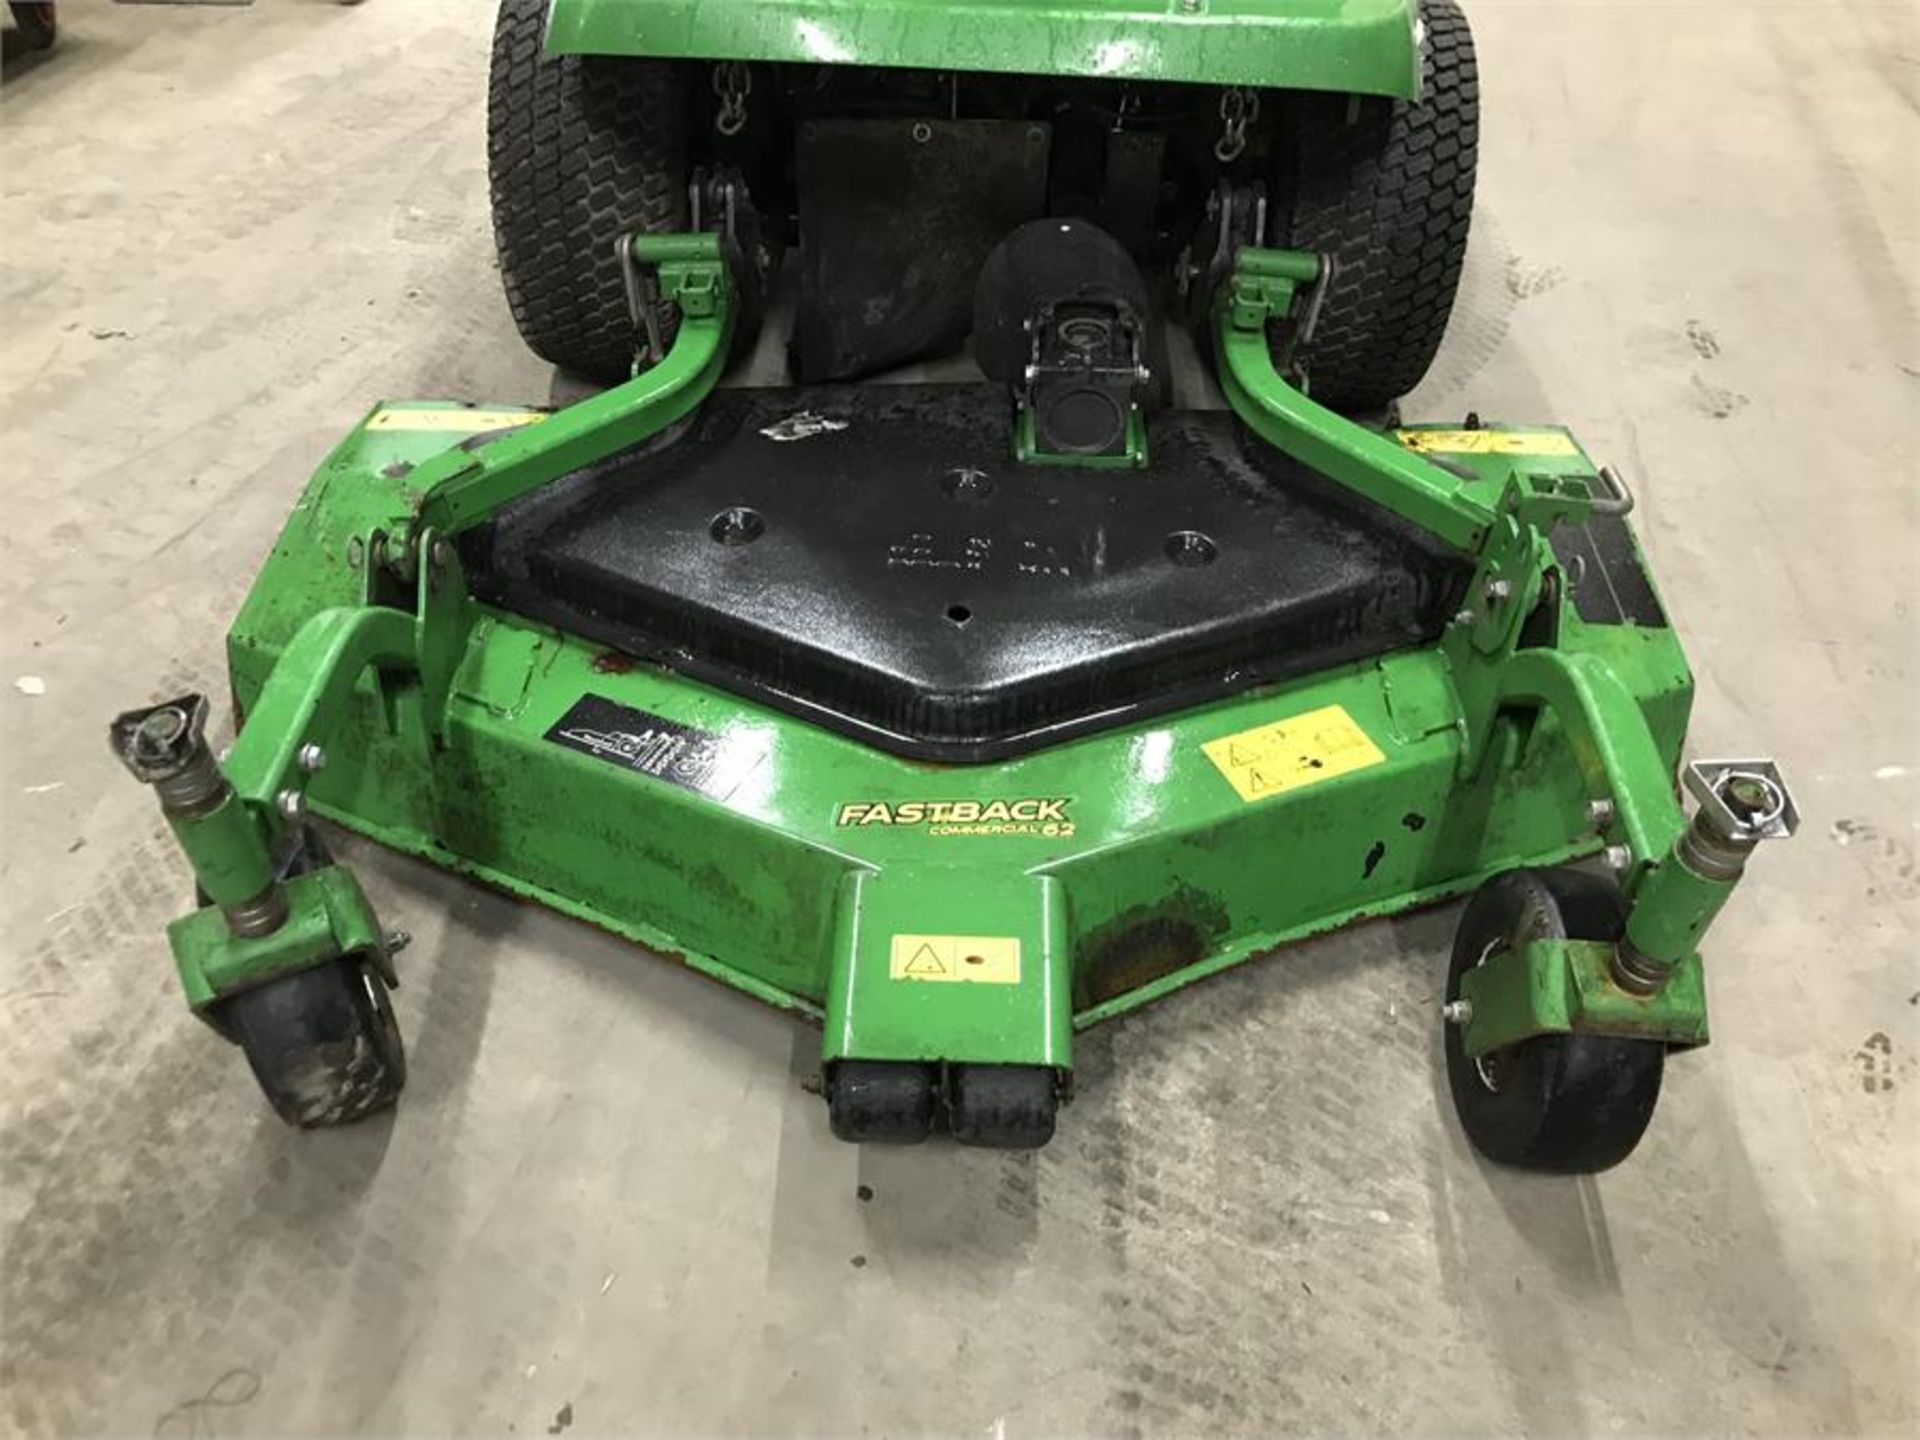 John Deere 1570 TER C 4WD Front Rotary Mower with Fastback Commercial 62 Attachment - Image 6 of 6